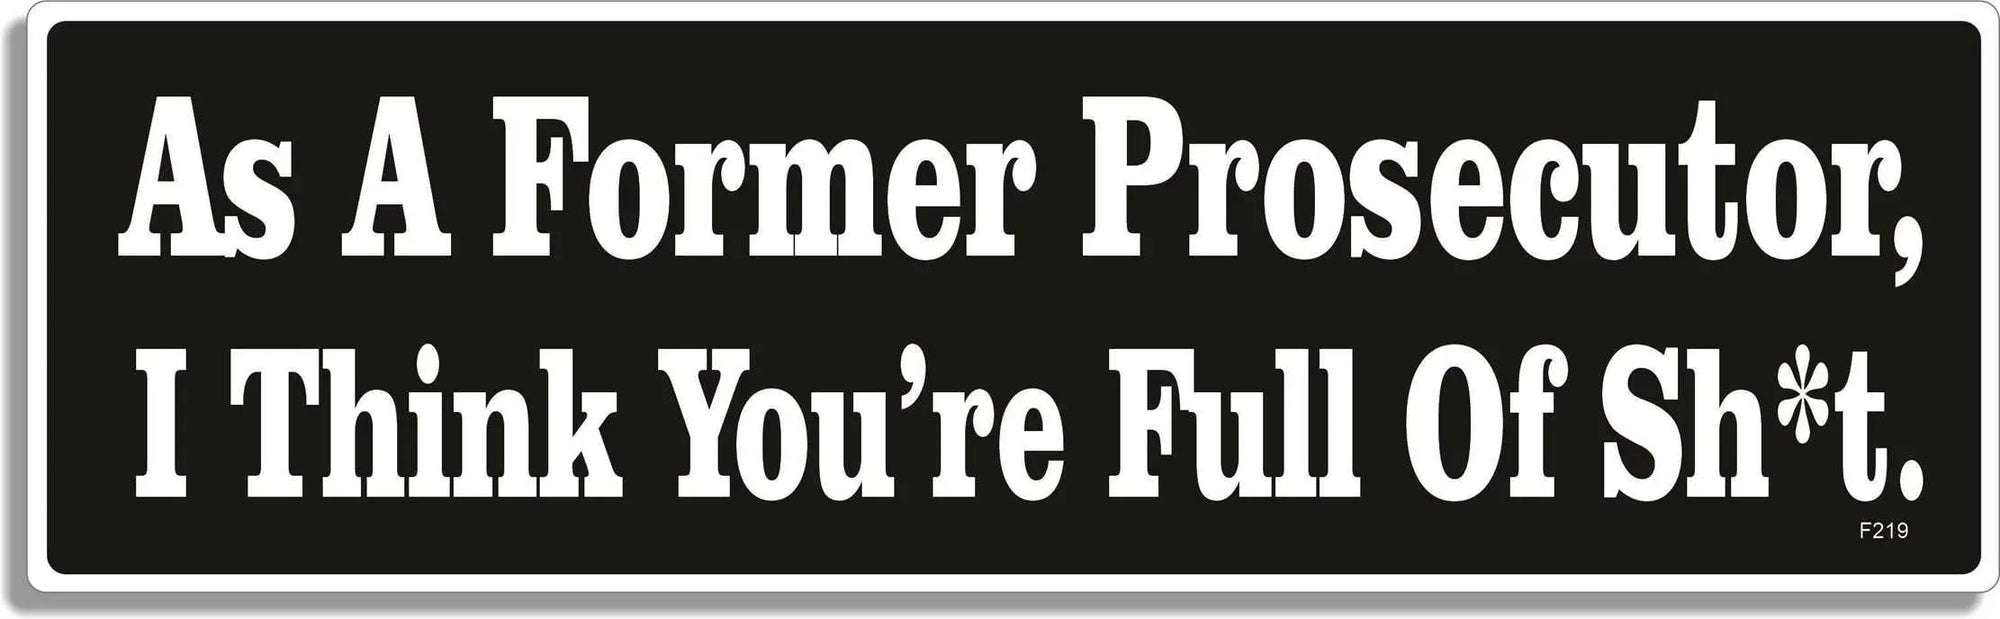 As A Former Prosecutor, I Think You're Full Of Sh*t -  Funny Bumper Sticker, Car Magnet